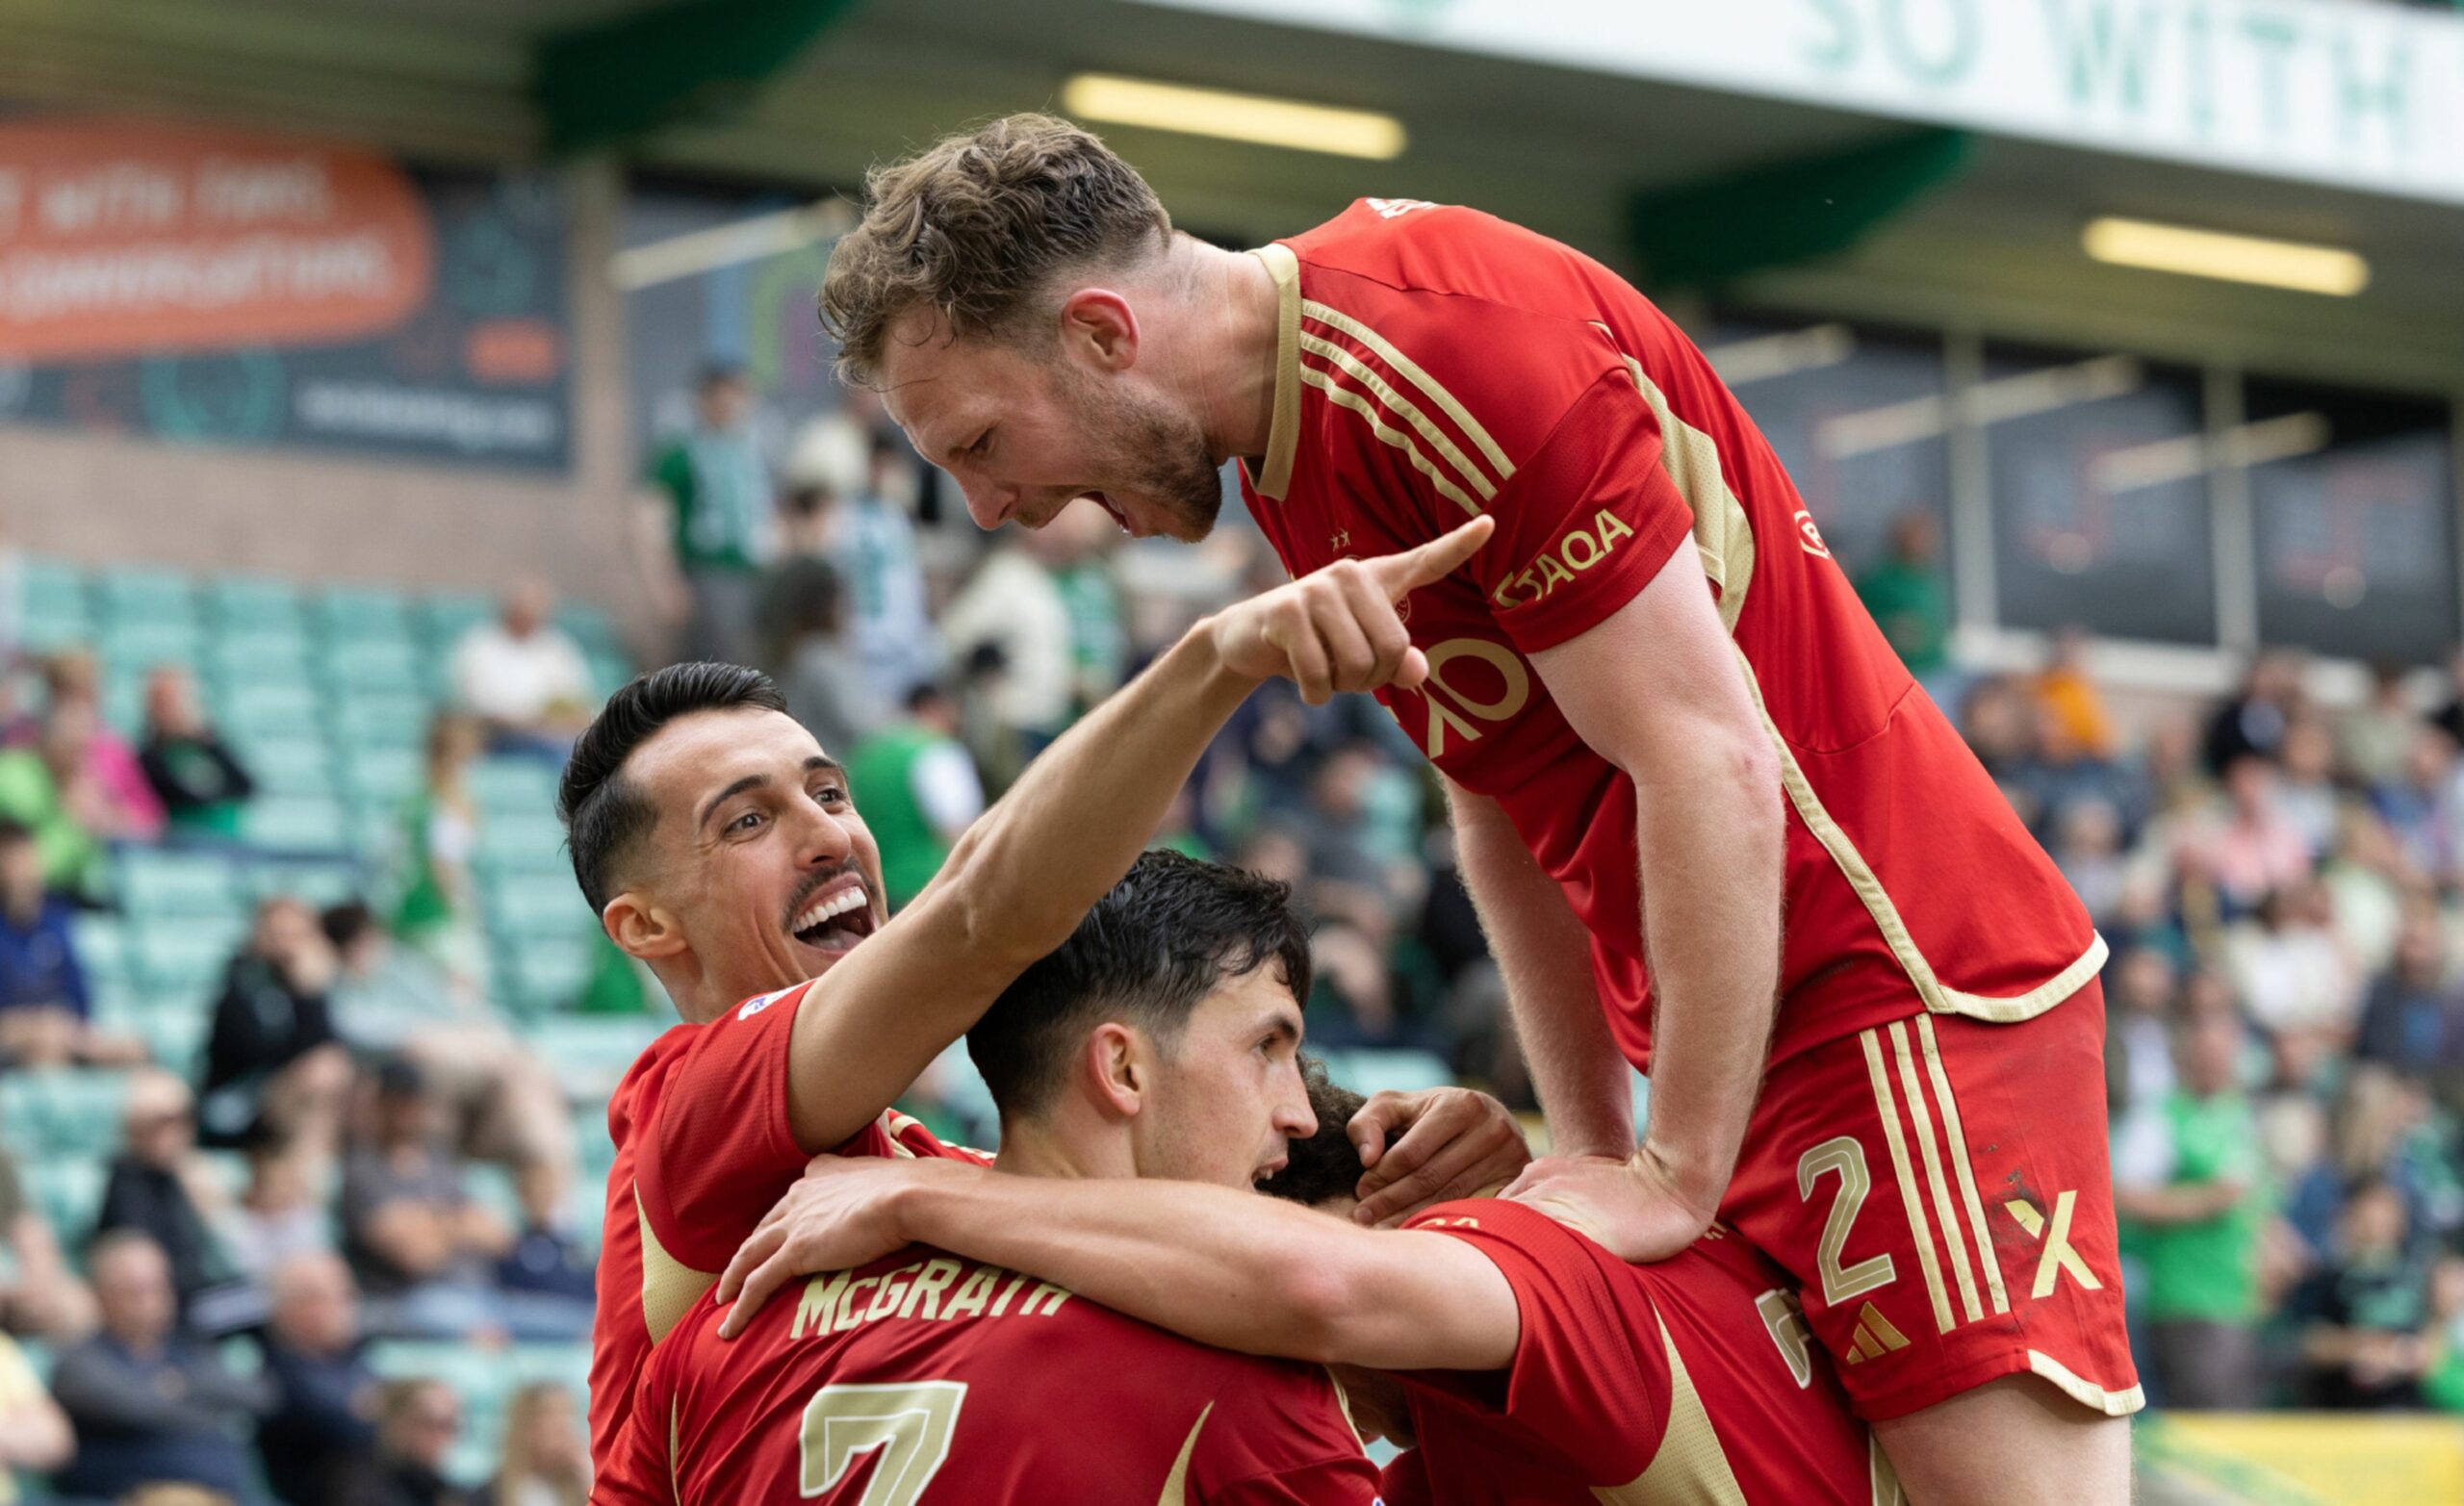 Aberdeen's Bojan Miovski celebrates with Nicky Devlin as he scores to make it 3-0 against Hibs at Easter Road.